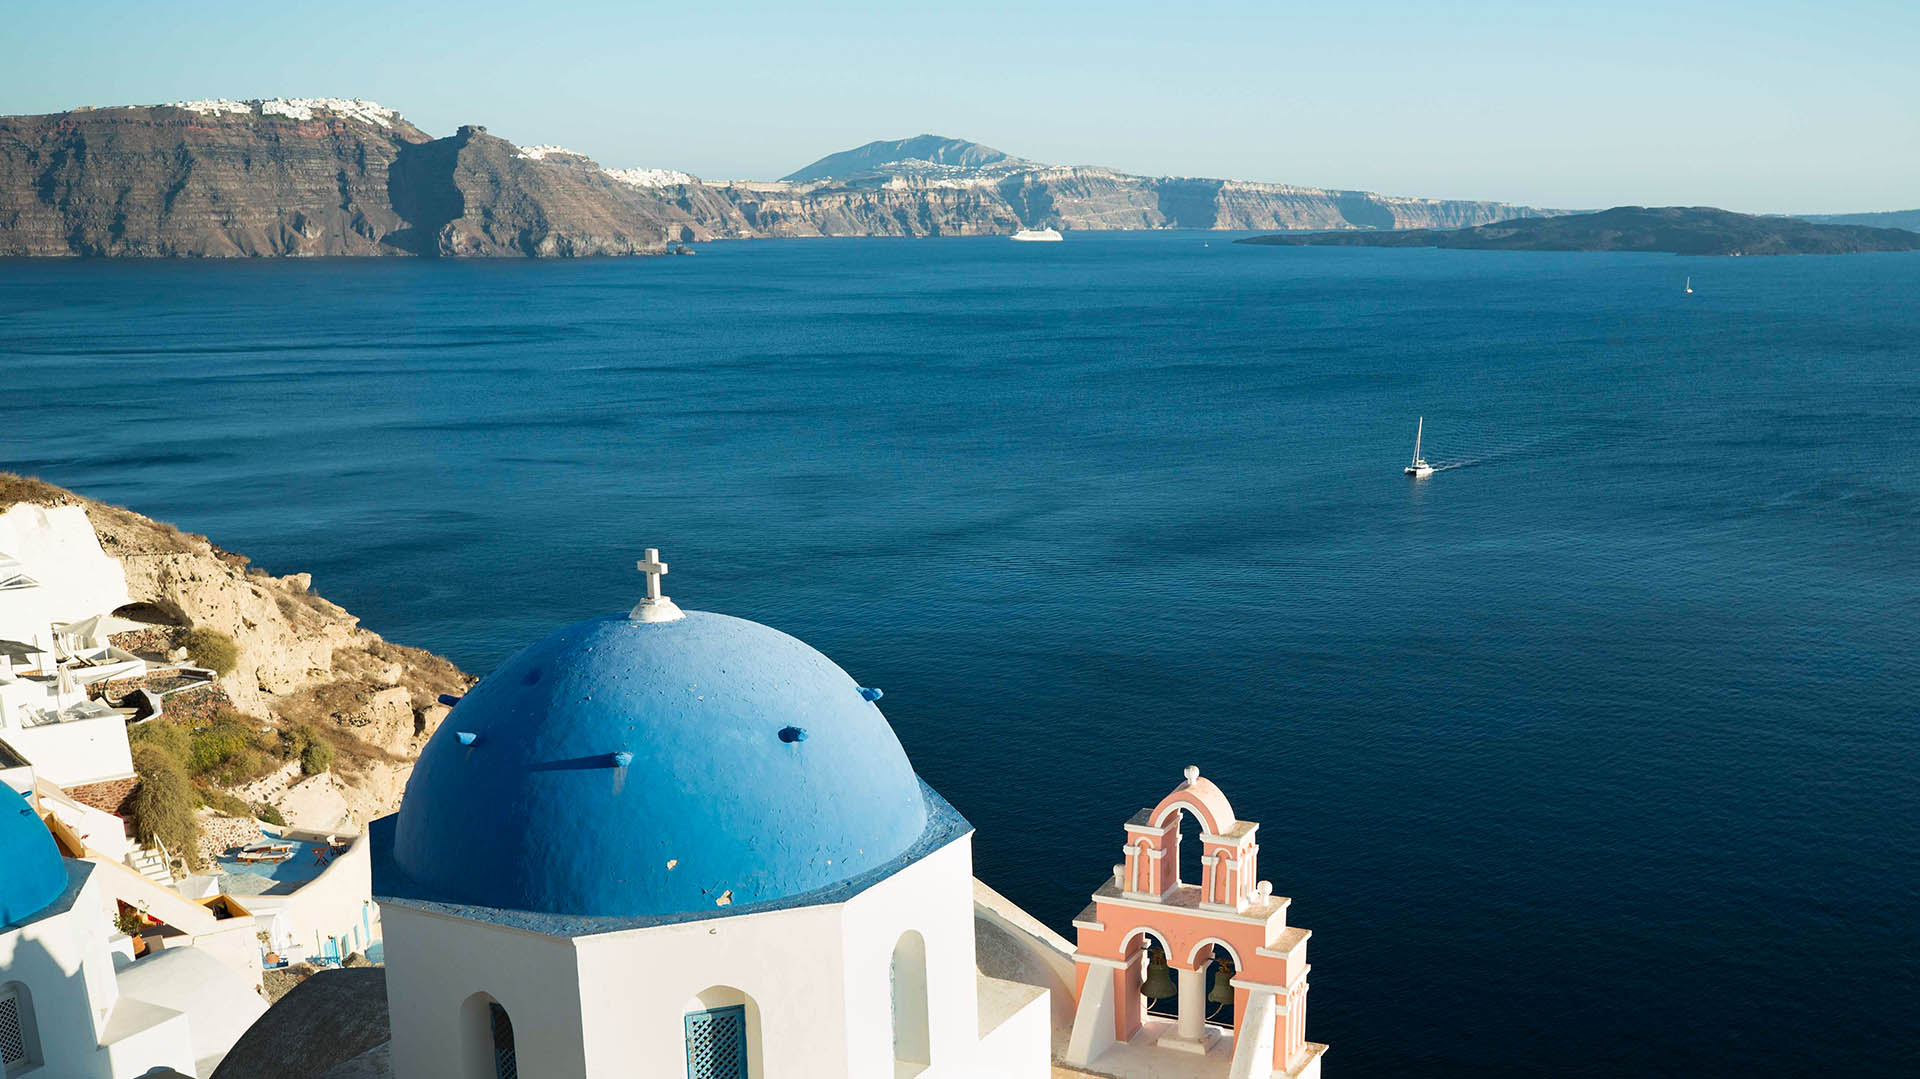             100% SANTORINI                     cruise designed to fit your vacation needs          